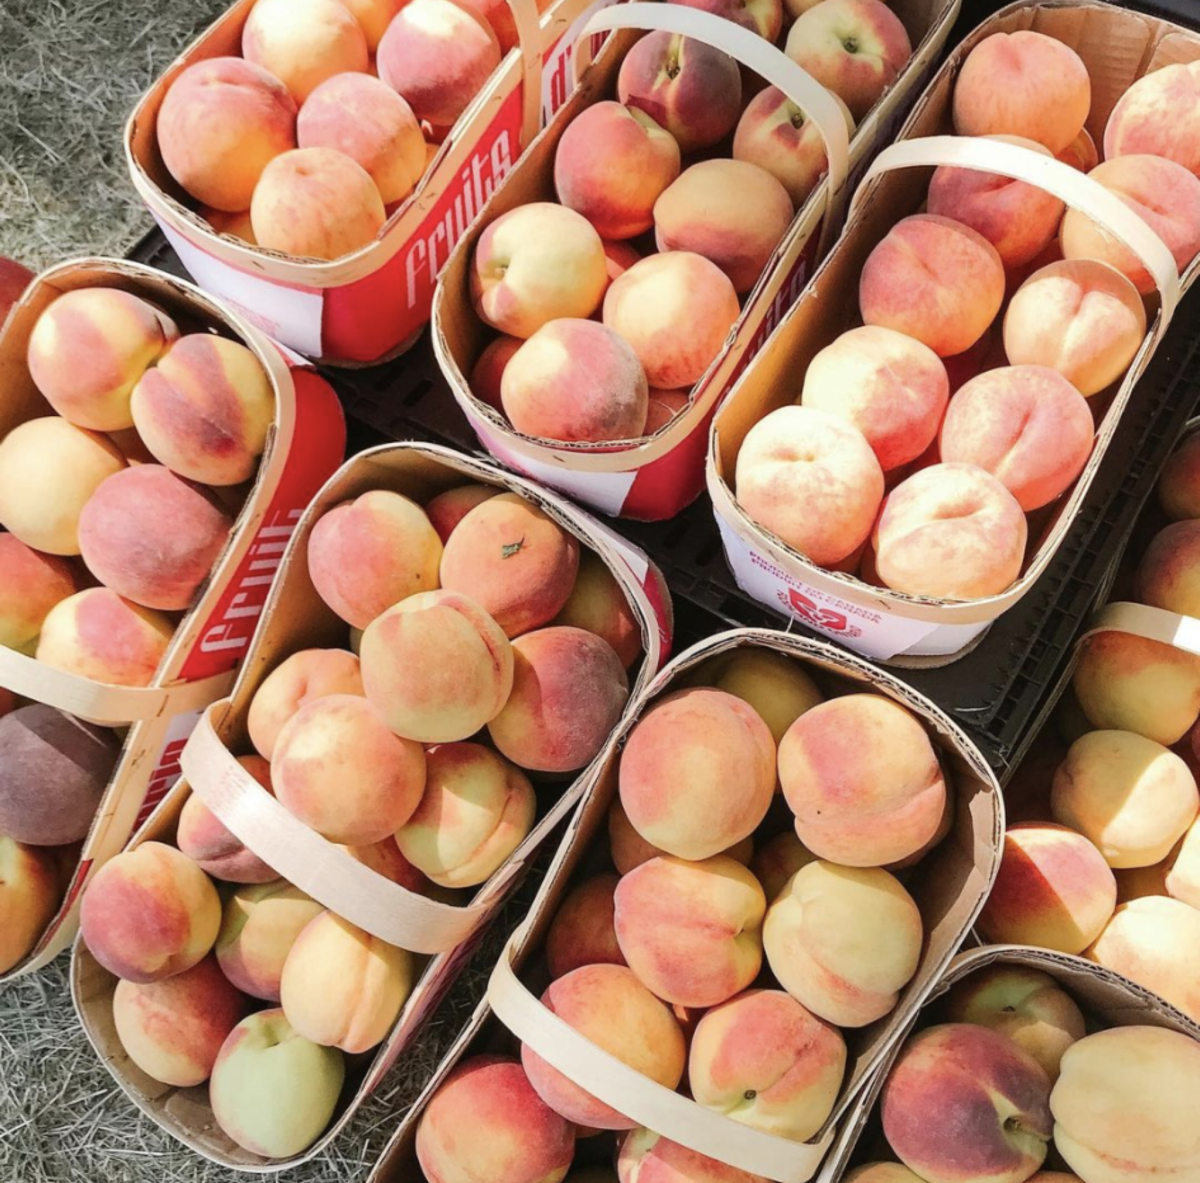 Organizers of the Winona Peach Festival cancelled for second year in a row